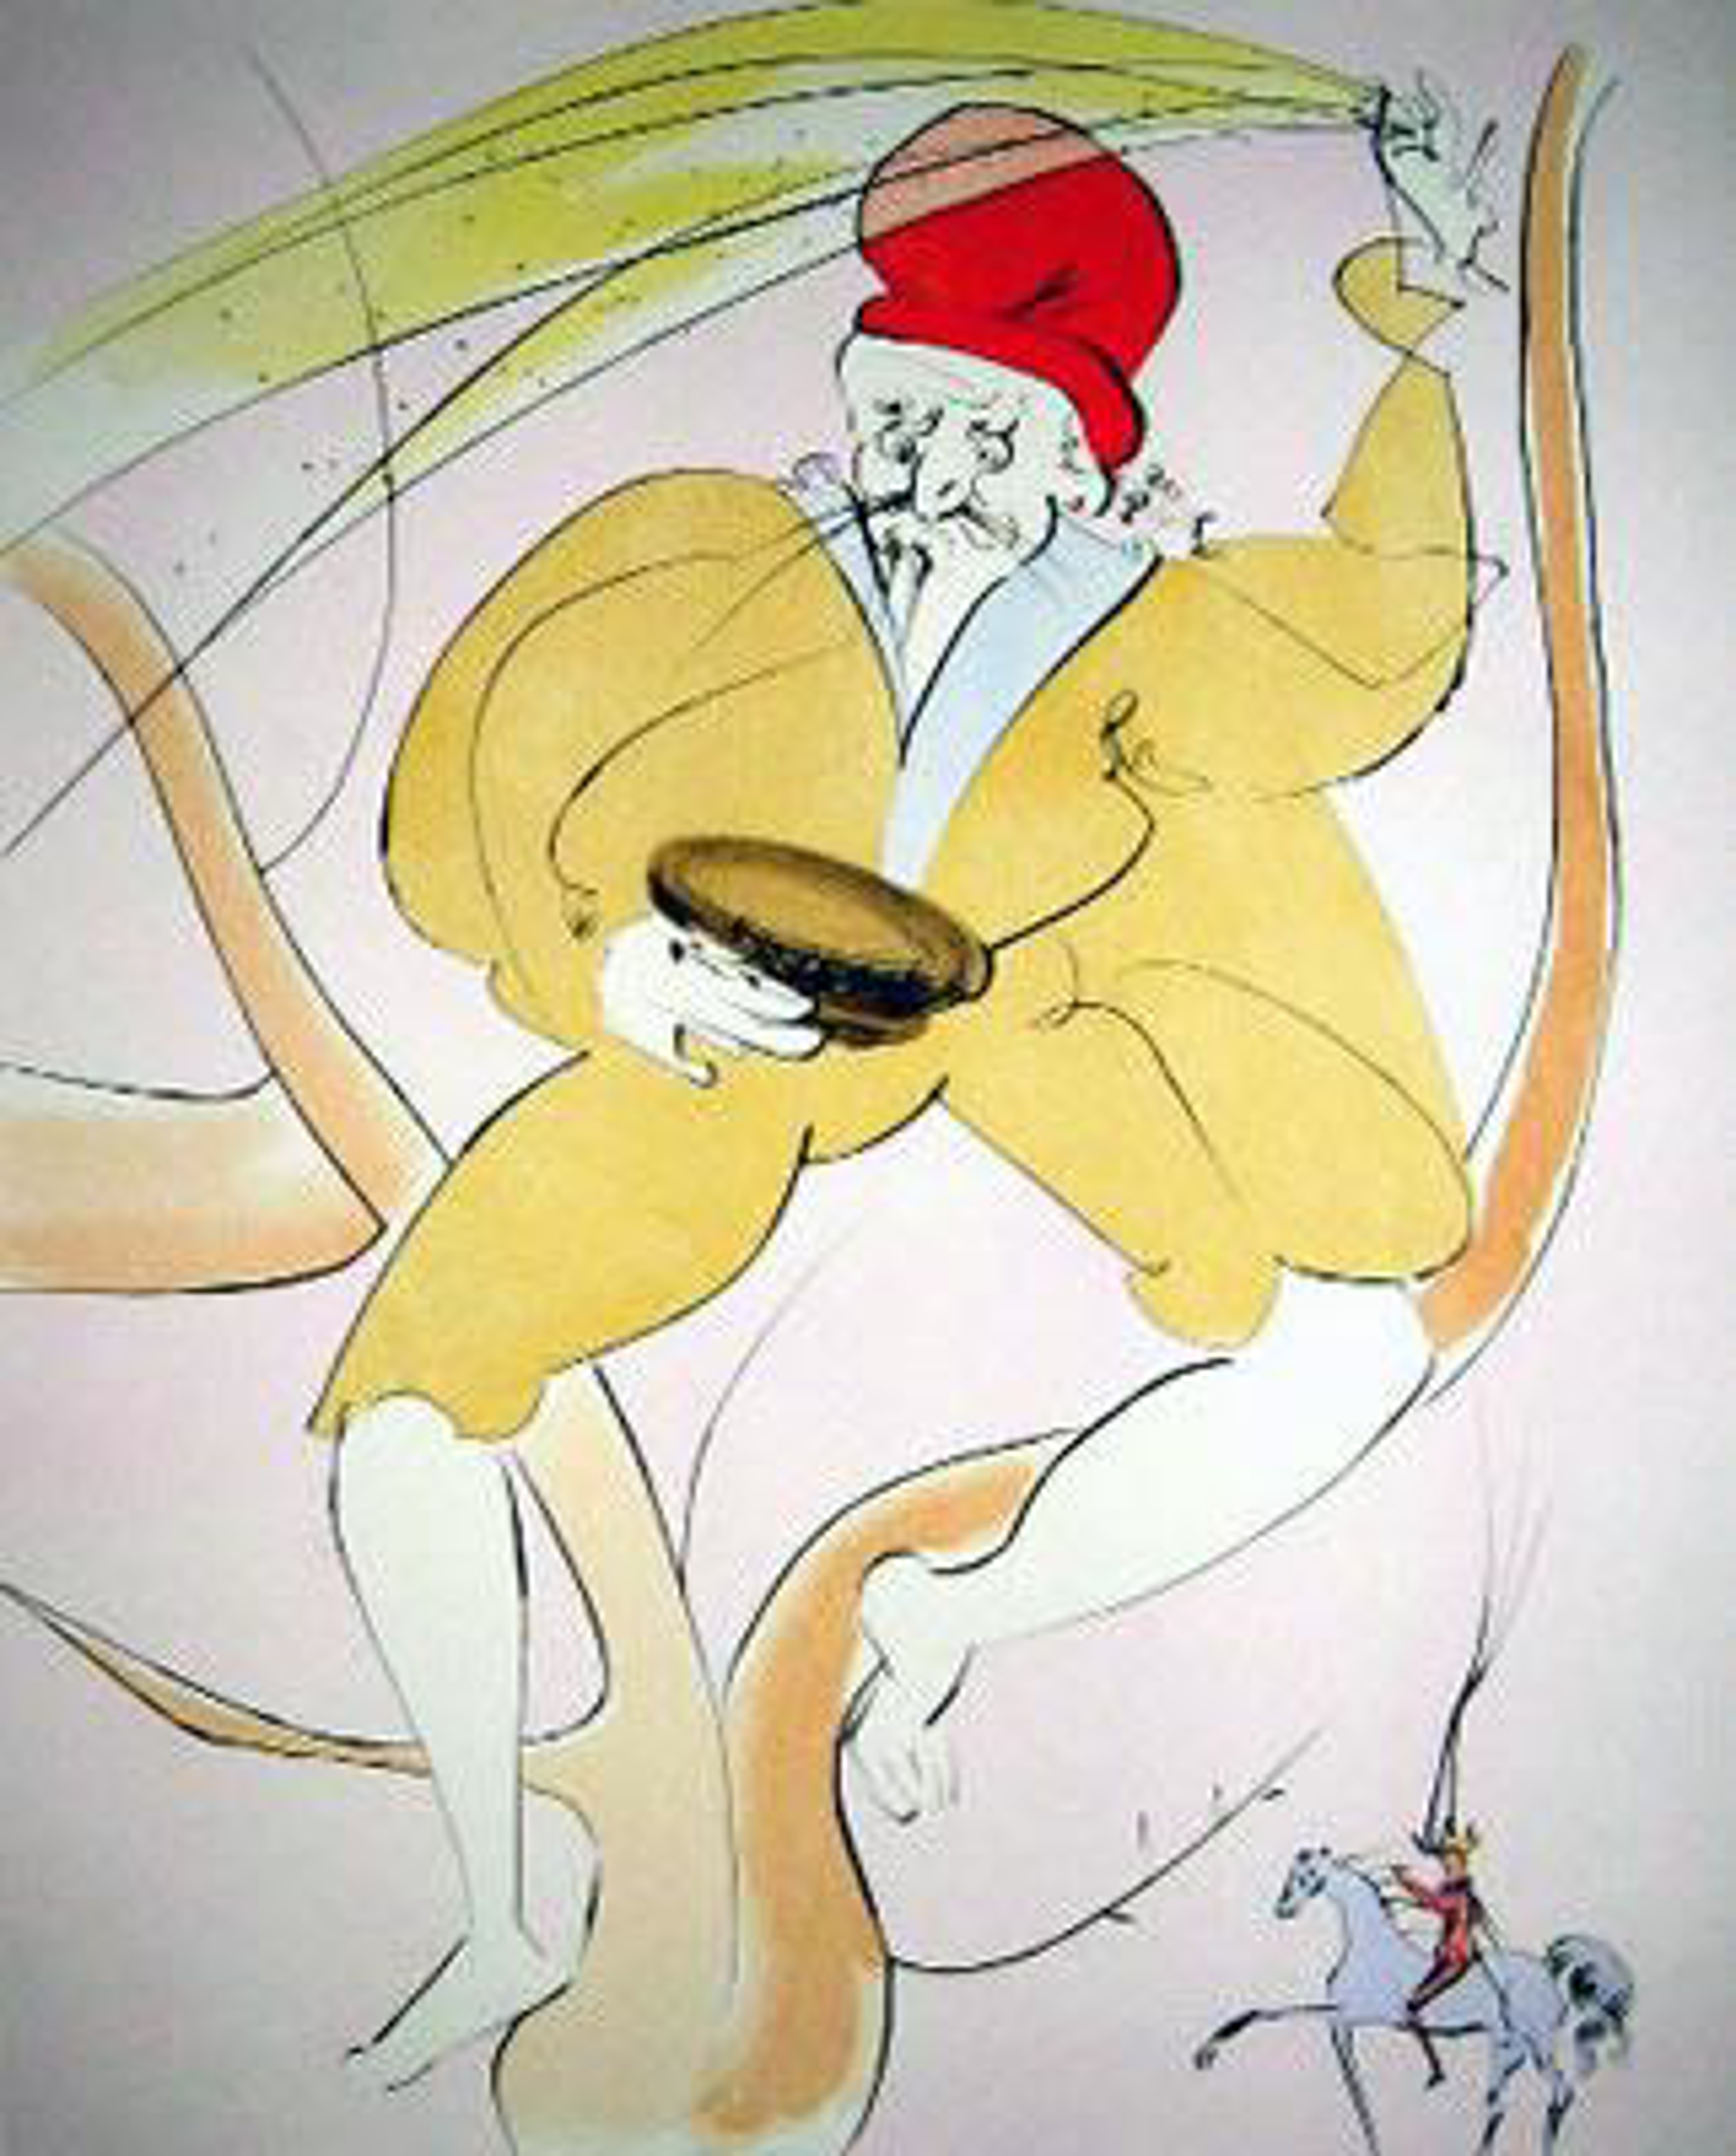 The Old Man Who Made Trees Grow (Japanese Fairy Tales, suite of 10) by Salvador Dali